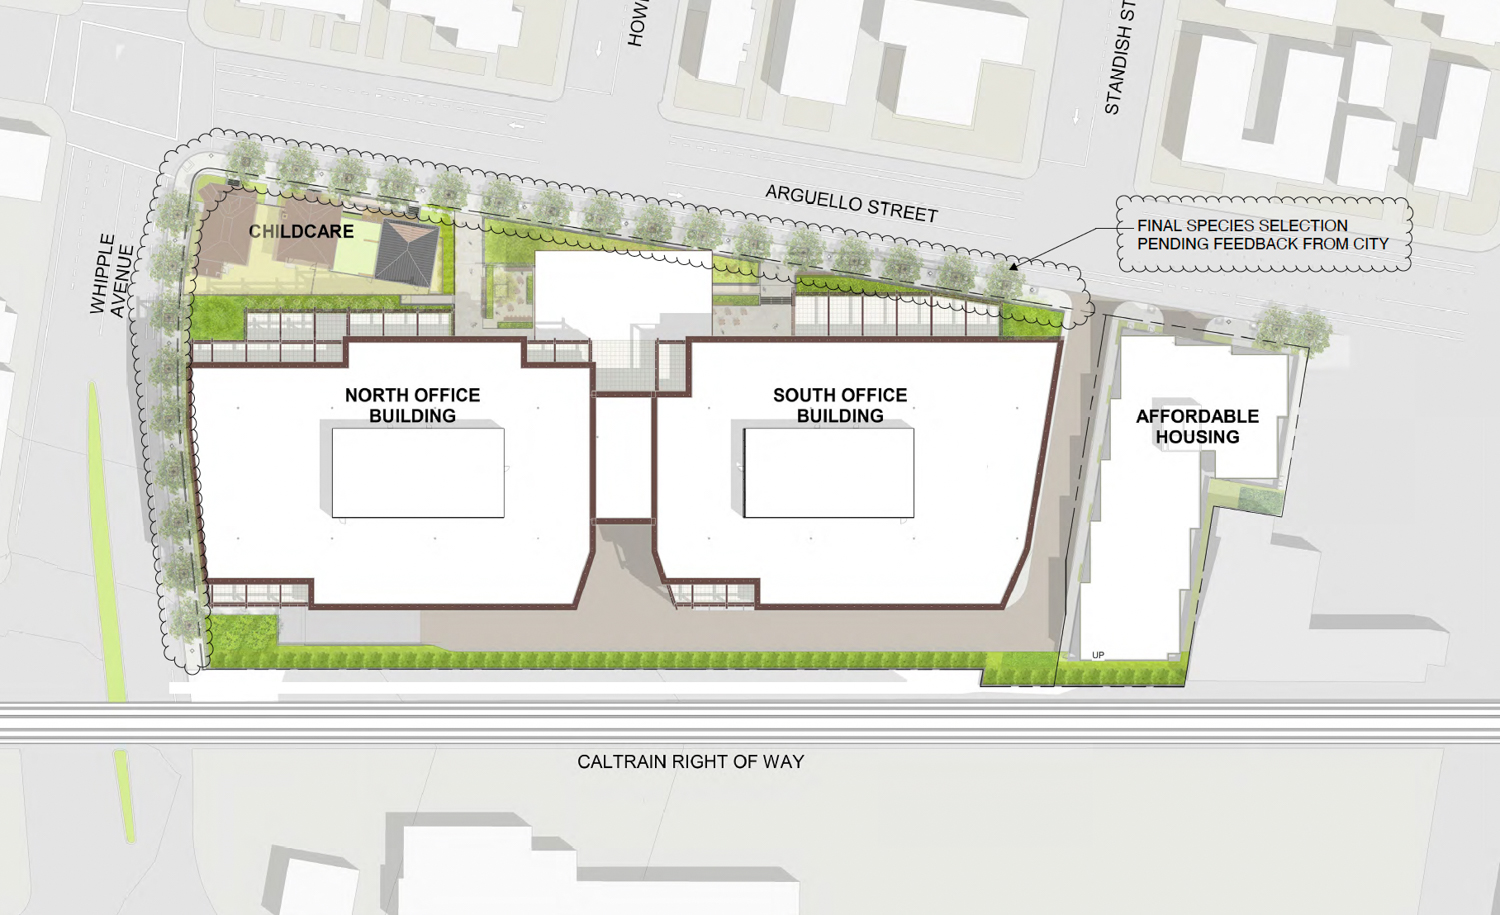 1125 Arguello Street site map, illustration by the DLR Group